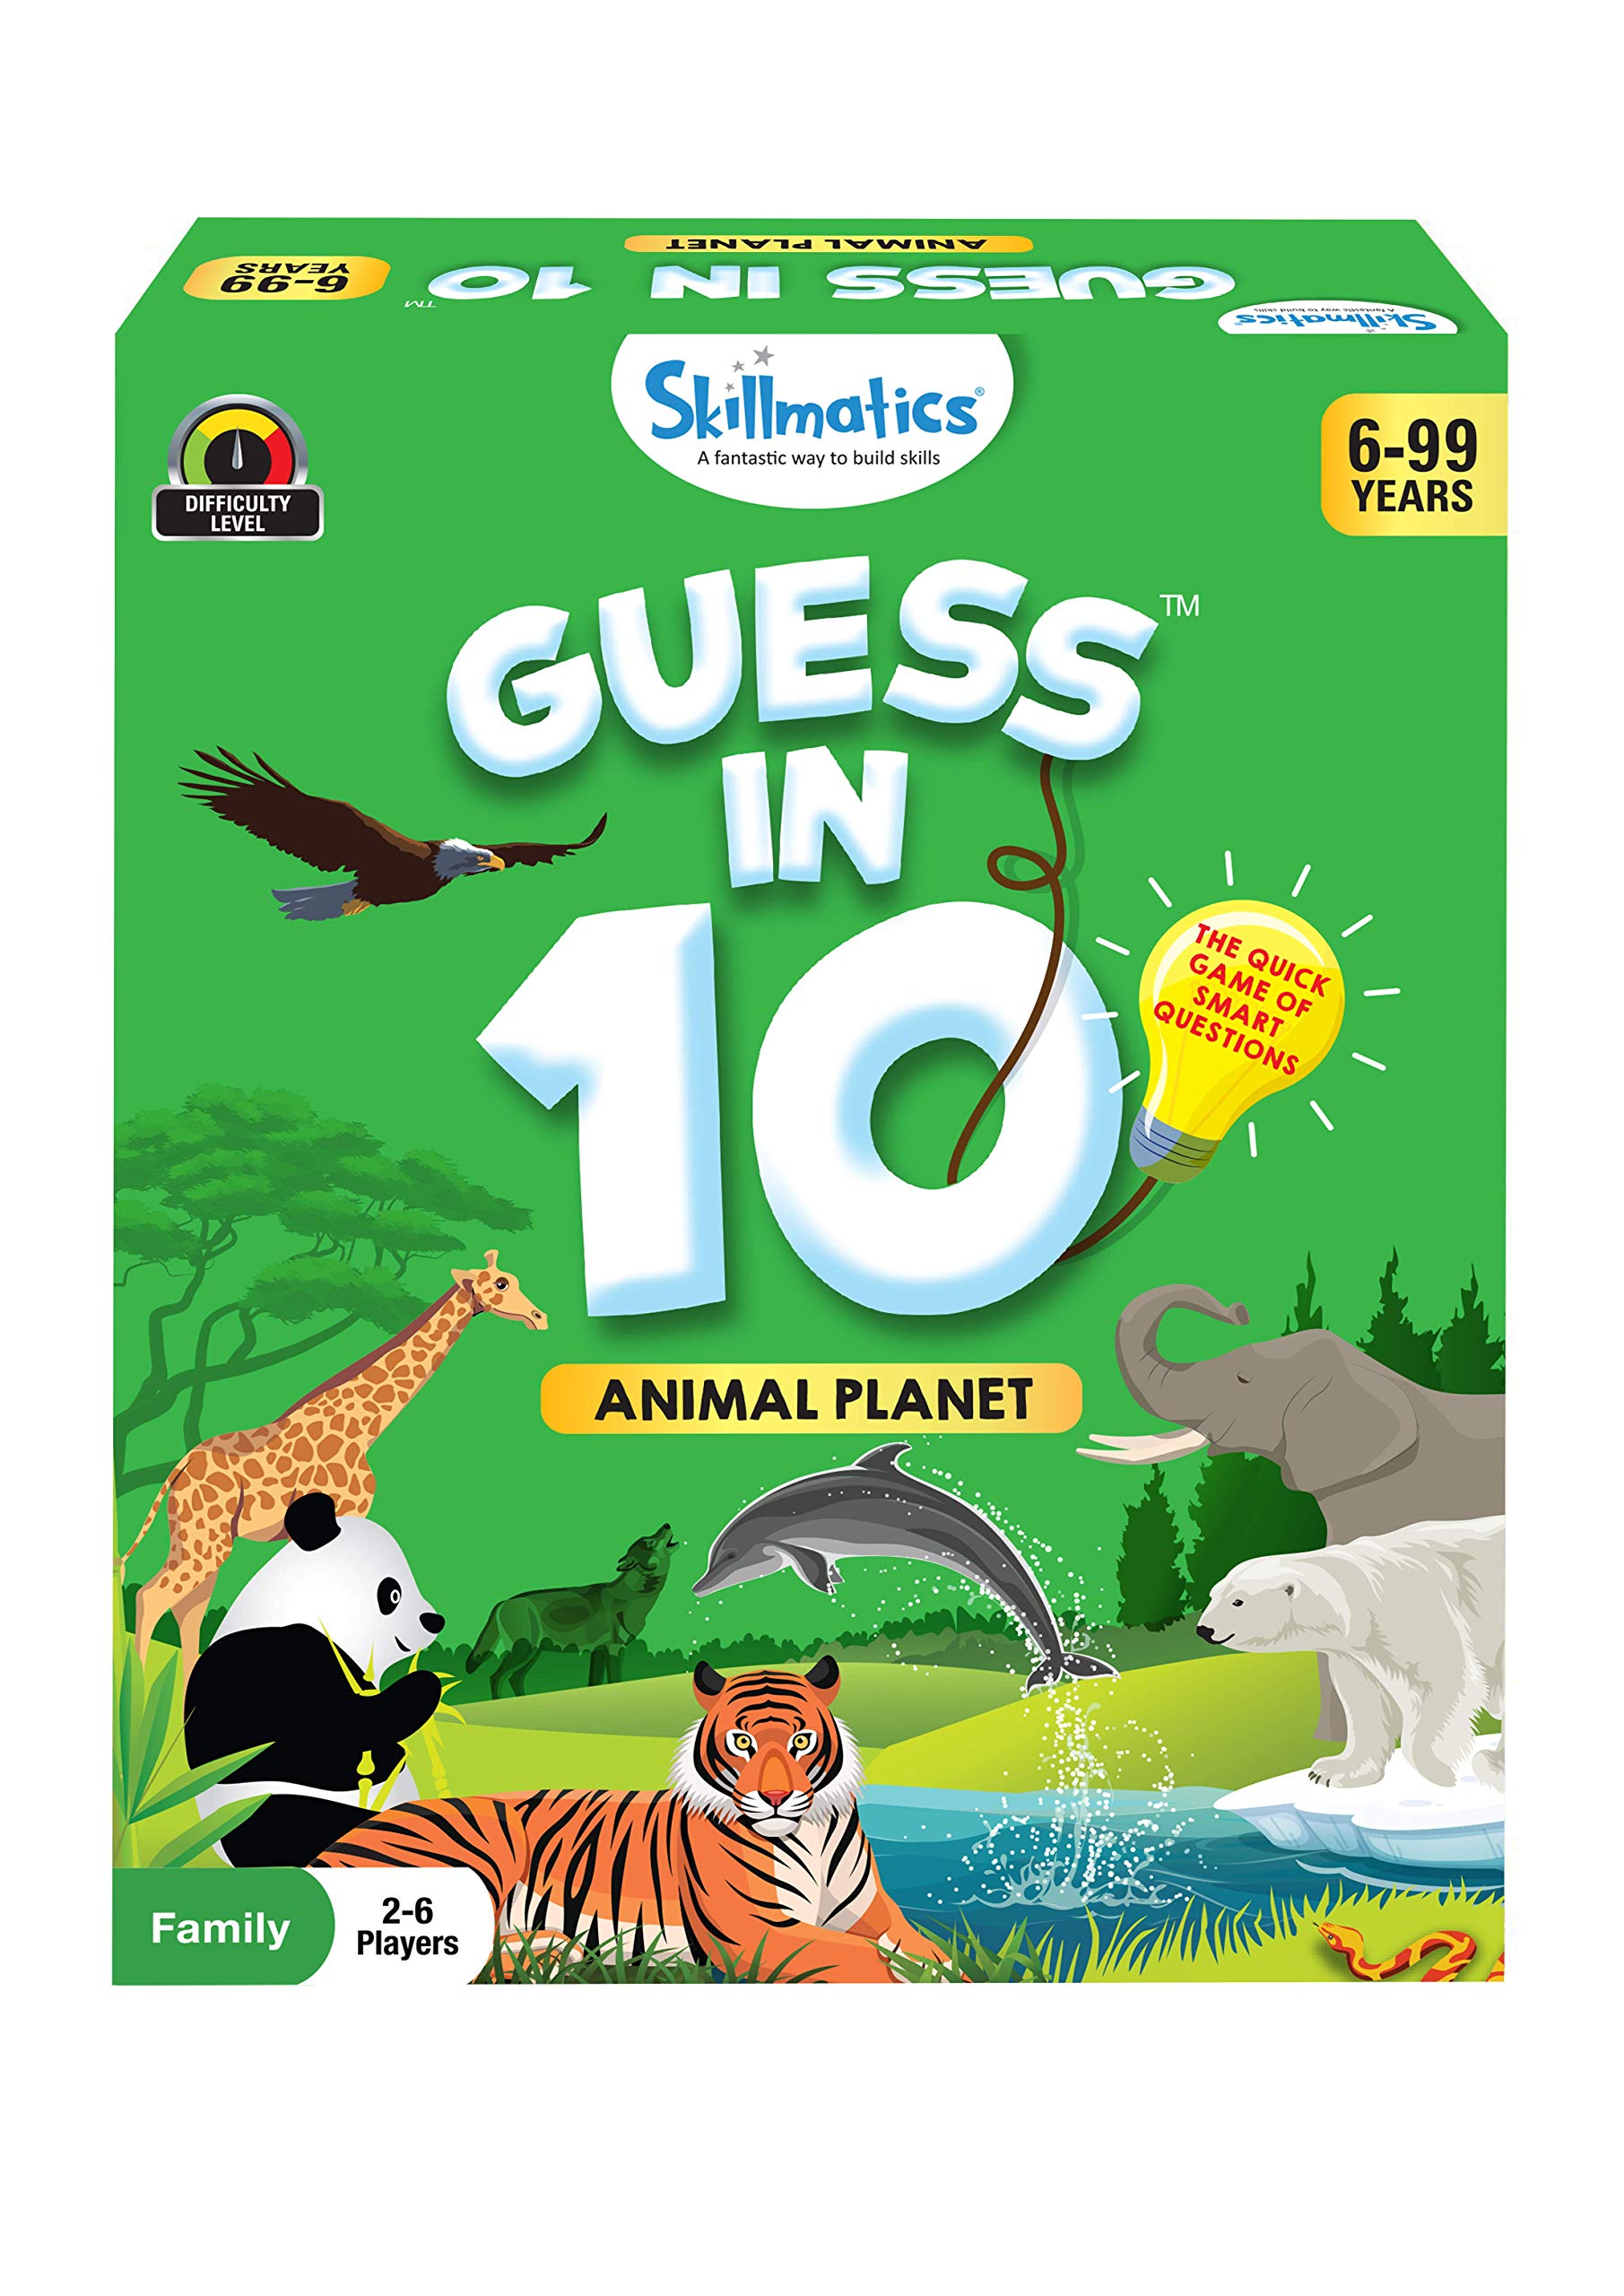 Skillmatics Card Game : Guess in 10 Animal Planet + Marvel Bundle | Gifts for 6 Year Olds and Up | Super Fun for Travel & Family Game Night